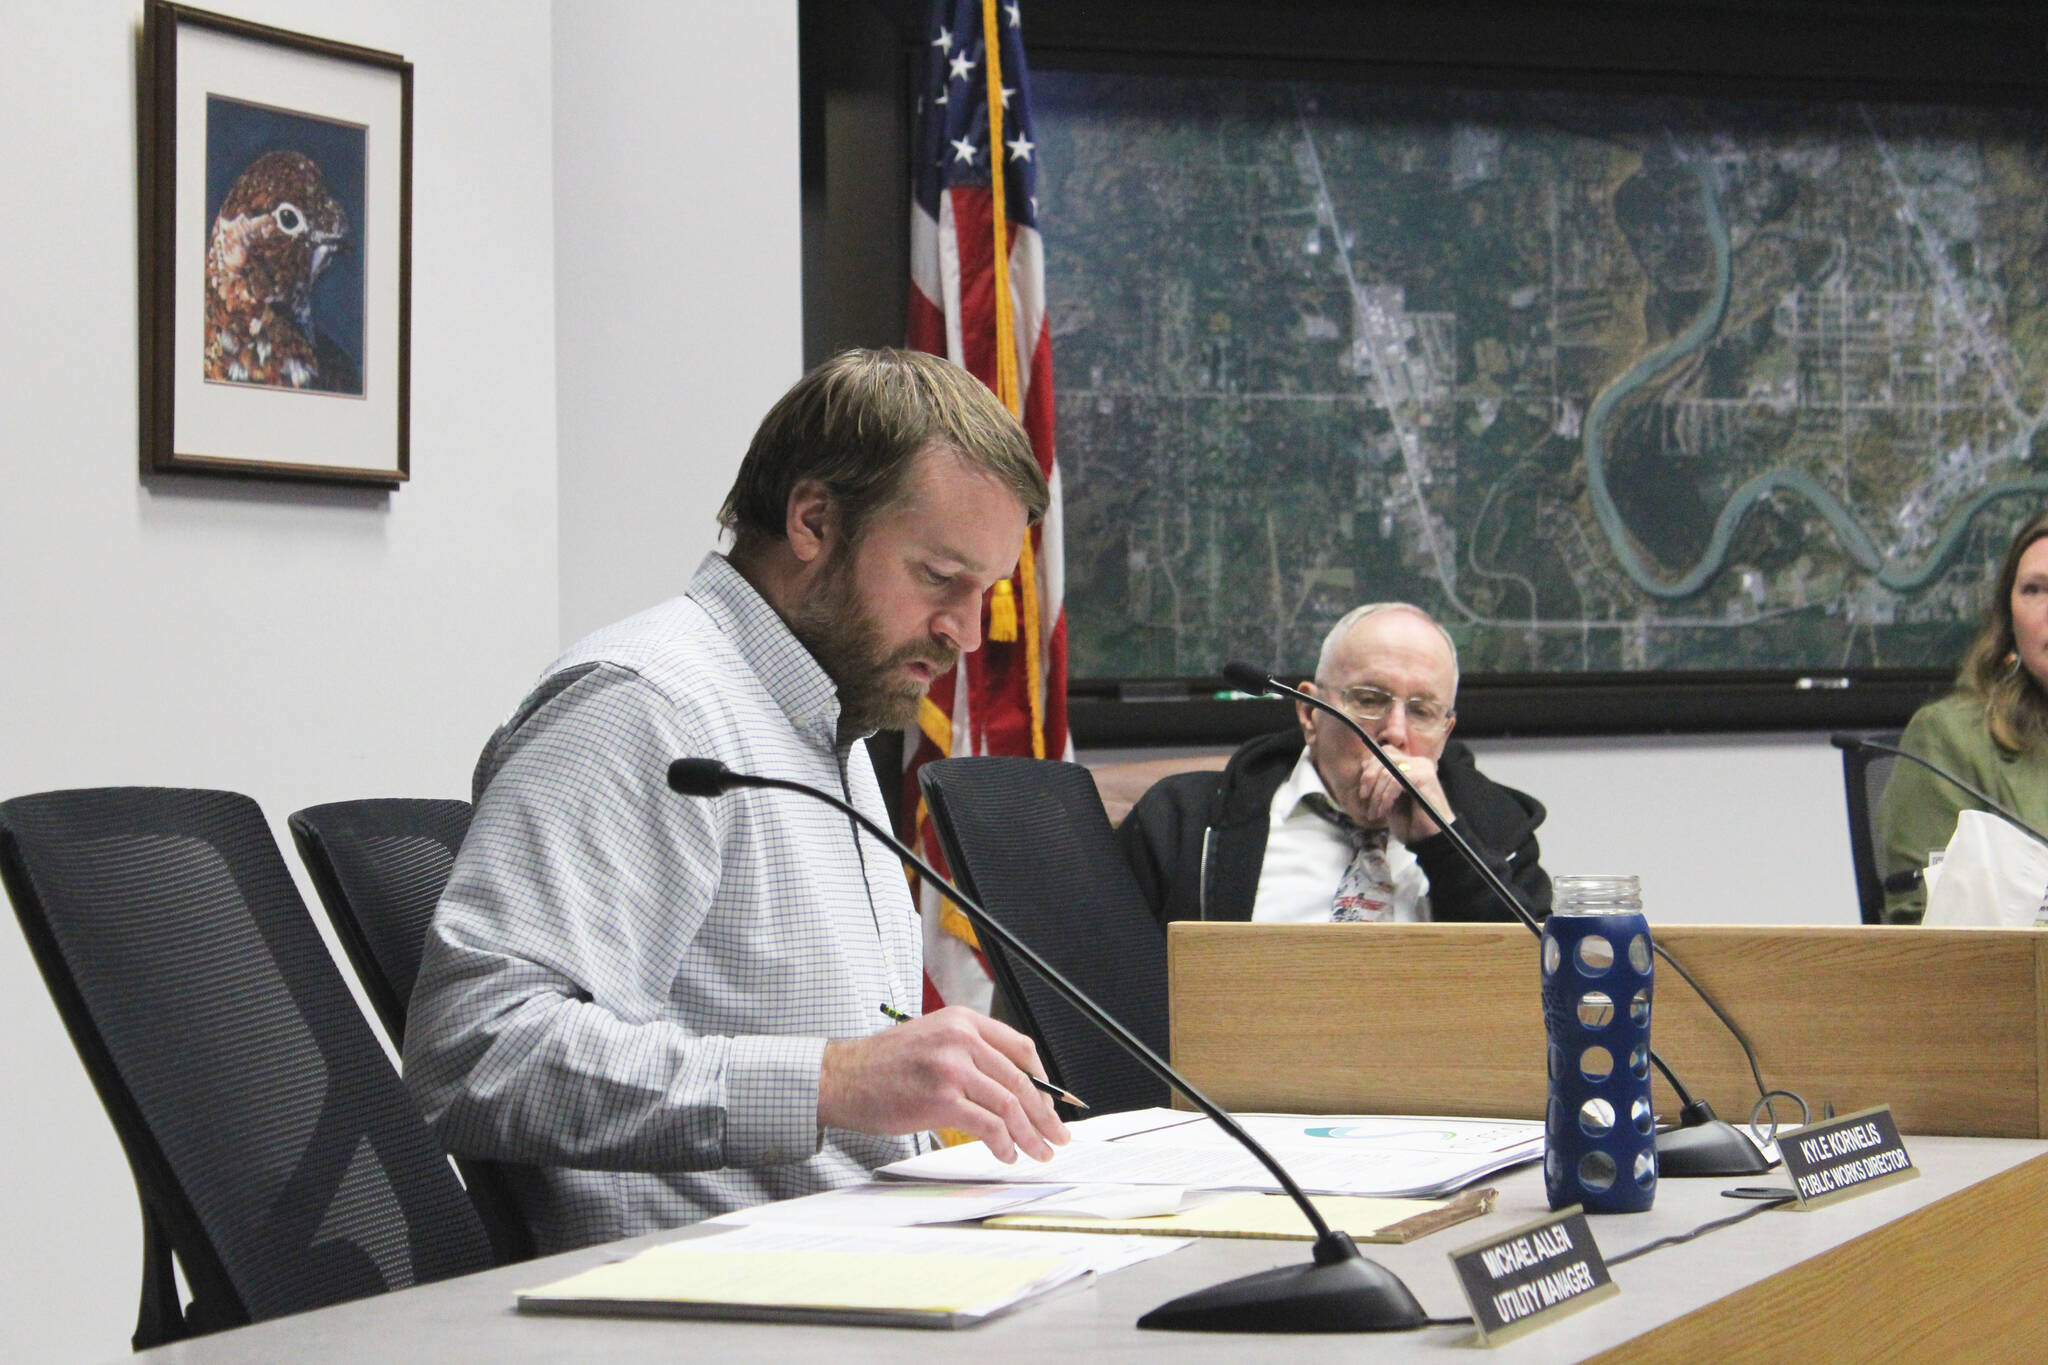 Soldotna Public Works Director Kyle Kornelis talks about the Soldotna field house project during a Soldotna City Council meeting on Wednesday, Dec. 14, 2022, in Soldotna, Alaska. (Ashlyn O’Hara/Peninsula Clarion)